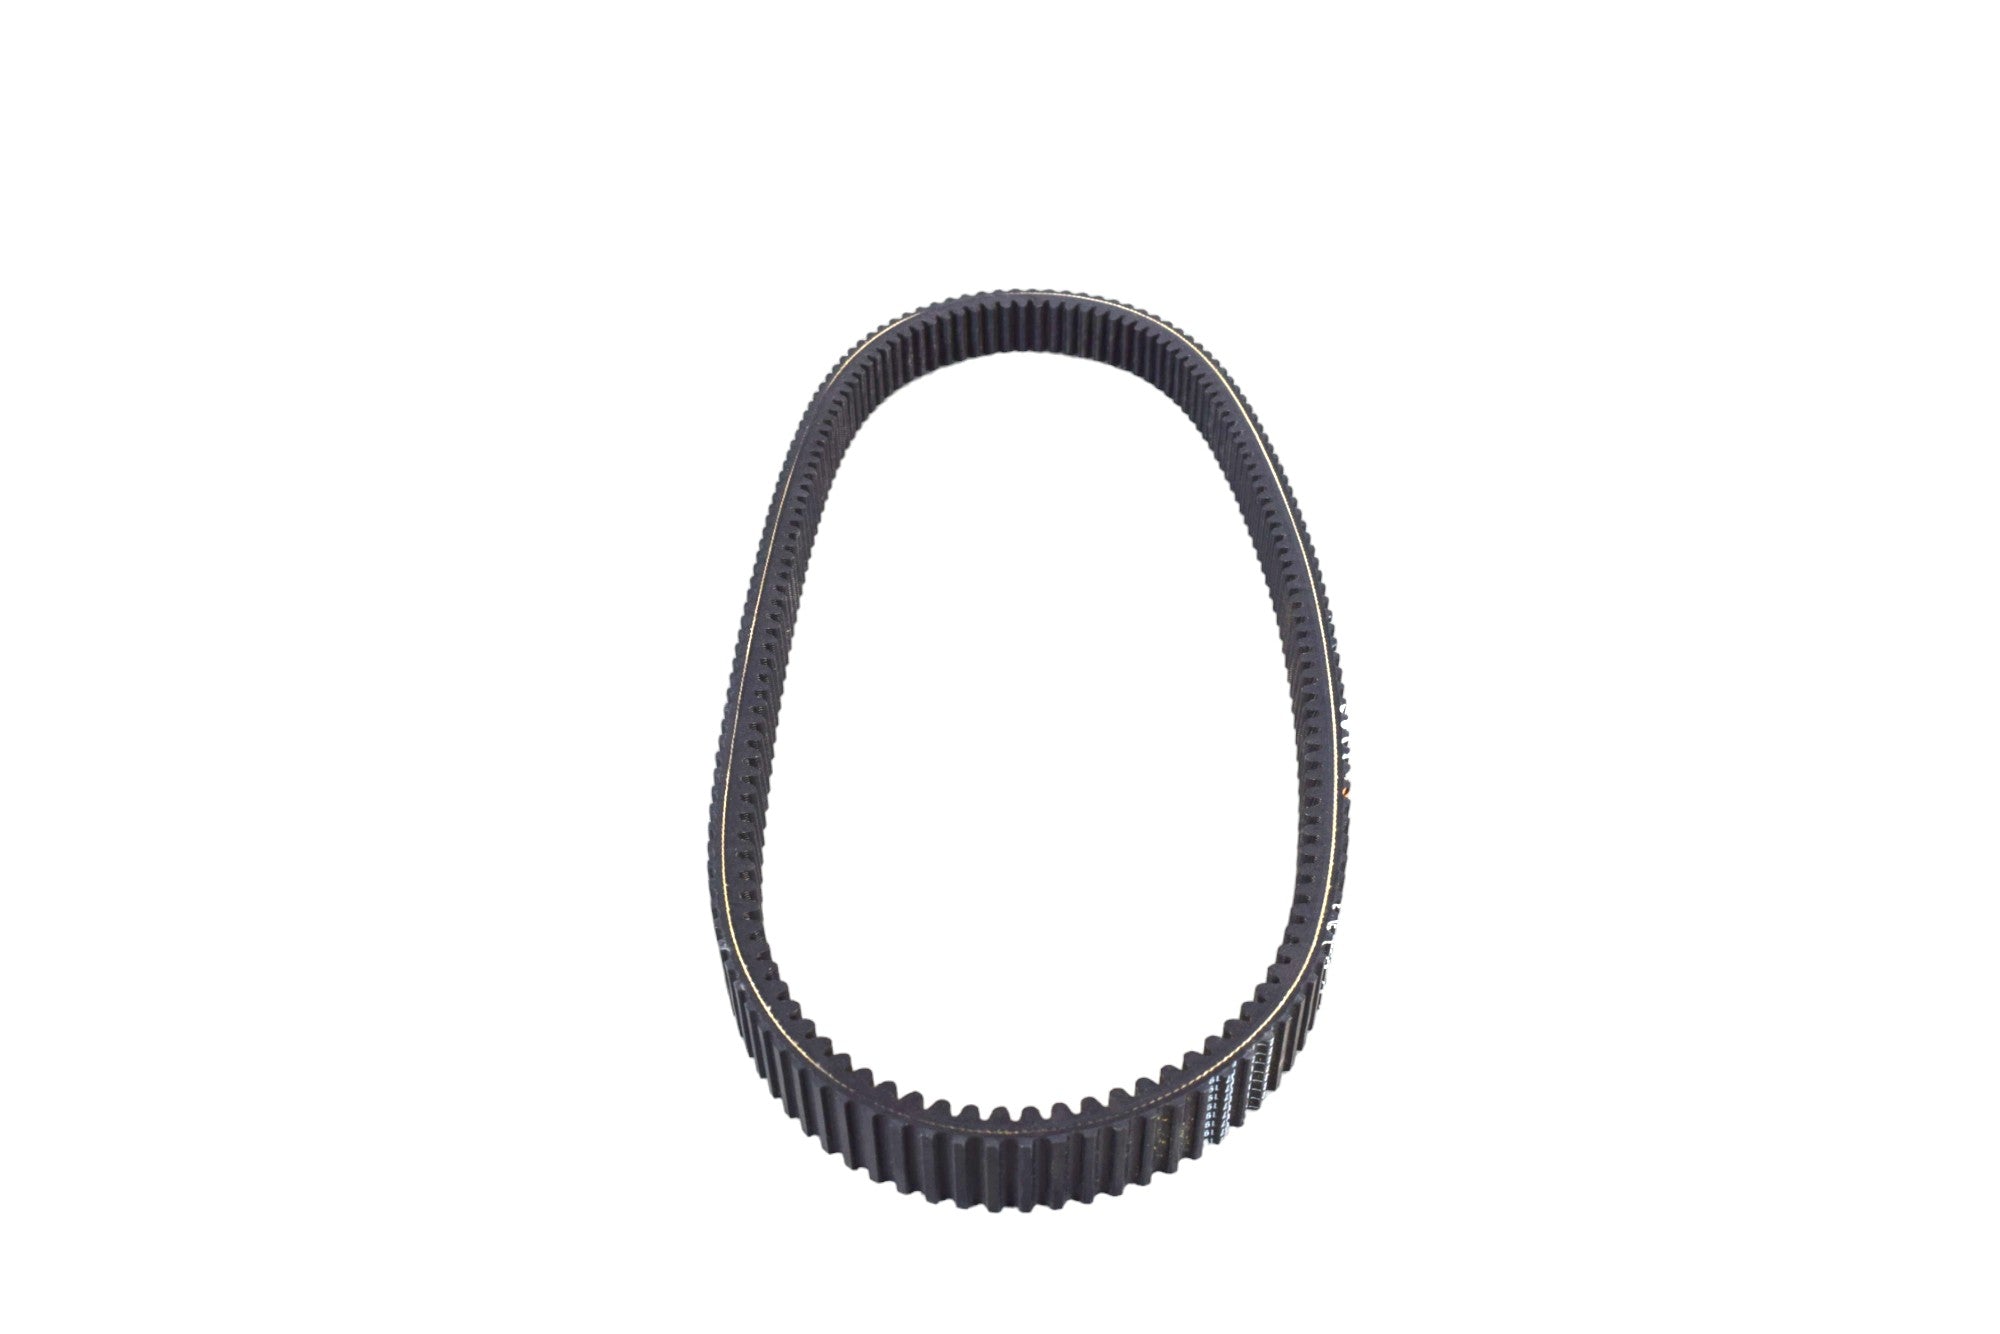 Ultimax UXP492 Drive Belt for Arctic Cat Textron OEM Replacement for 670527 (Made in USA)